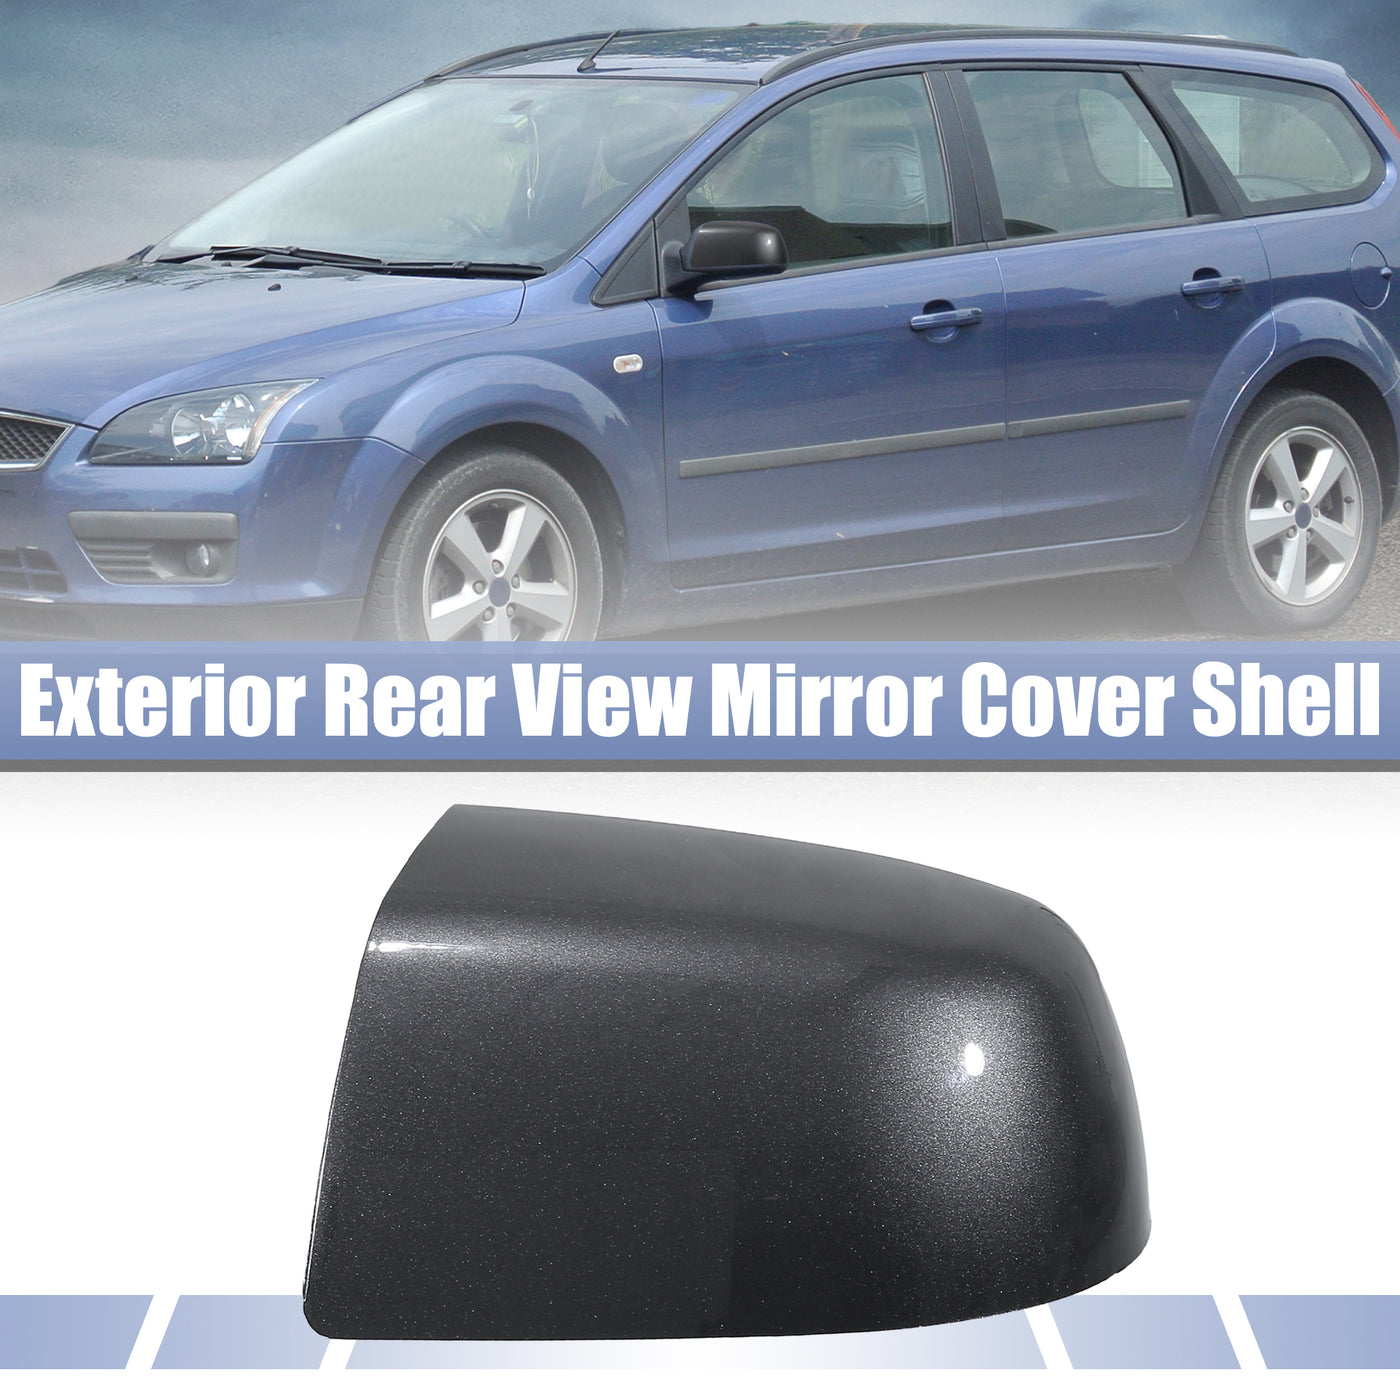 ACROPIX Front Left Car Exterior Rear View Mirror Cover Shell Trim Dark Gray Fit for Ford Focus Mk2 2005-2007 - Pack of 1